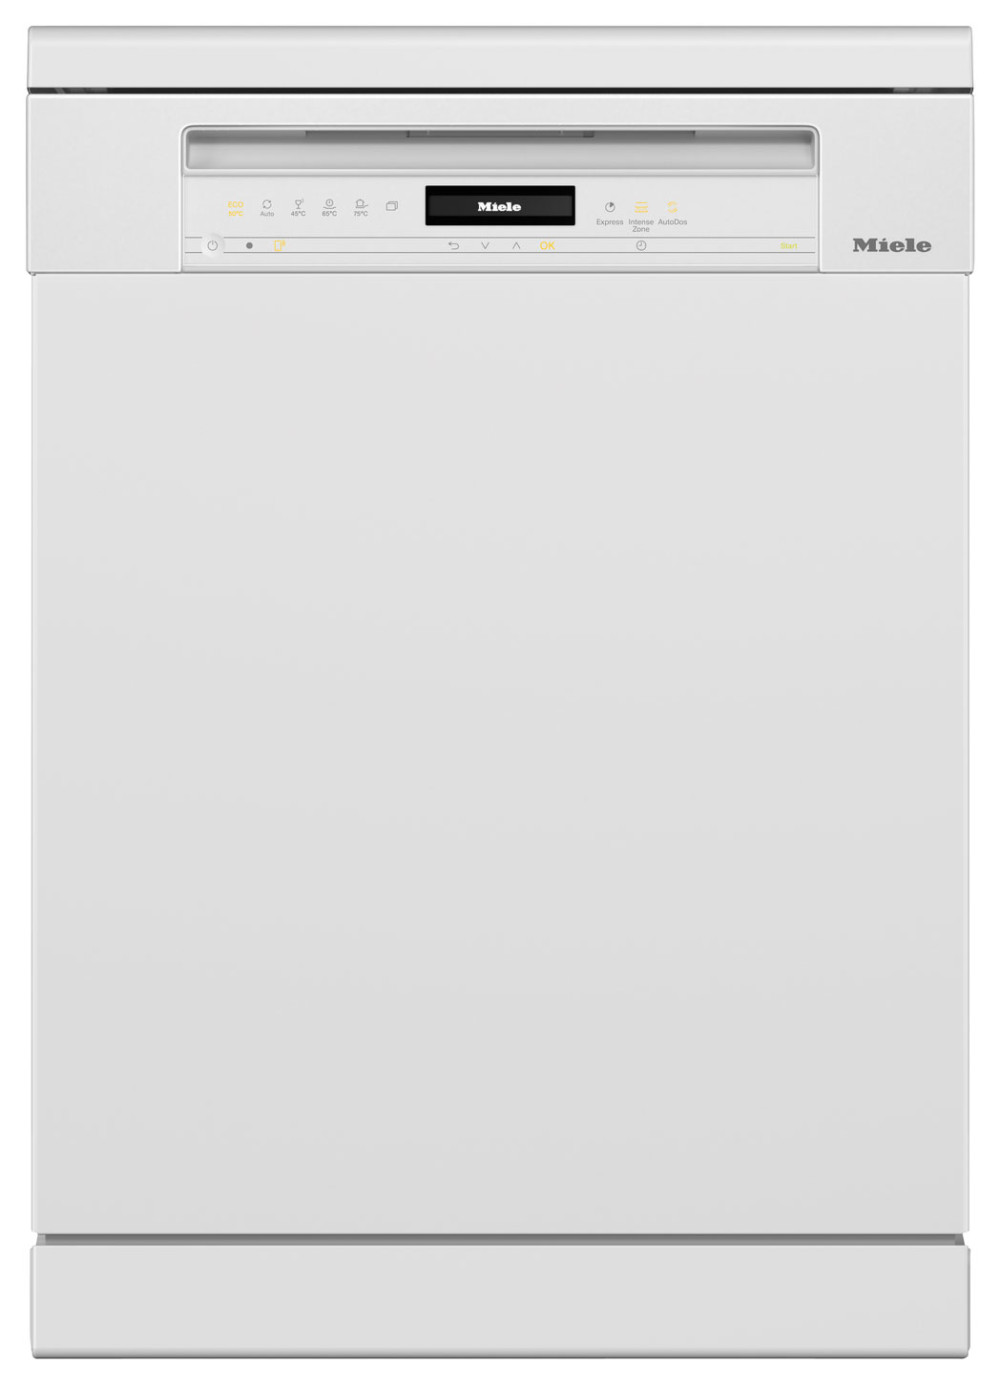 Miele G 7422 SC AutoDos Select Dishwasher featured image